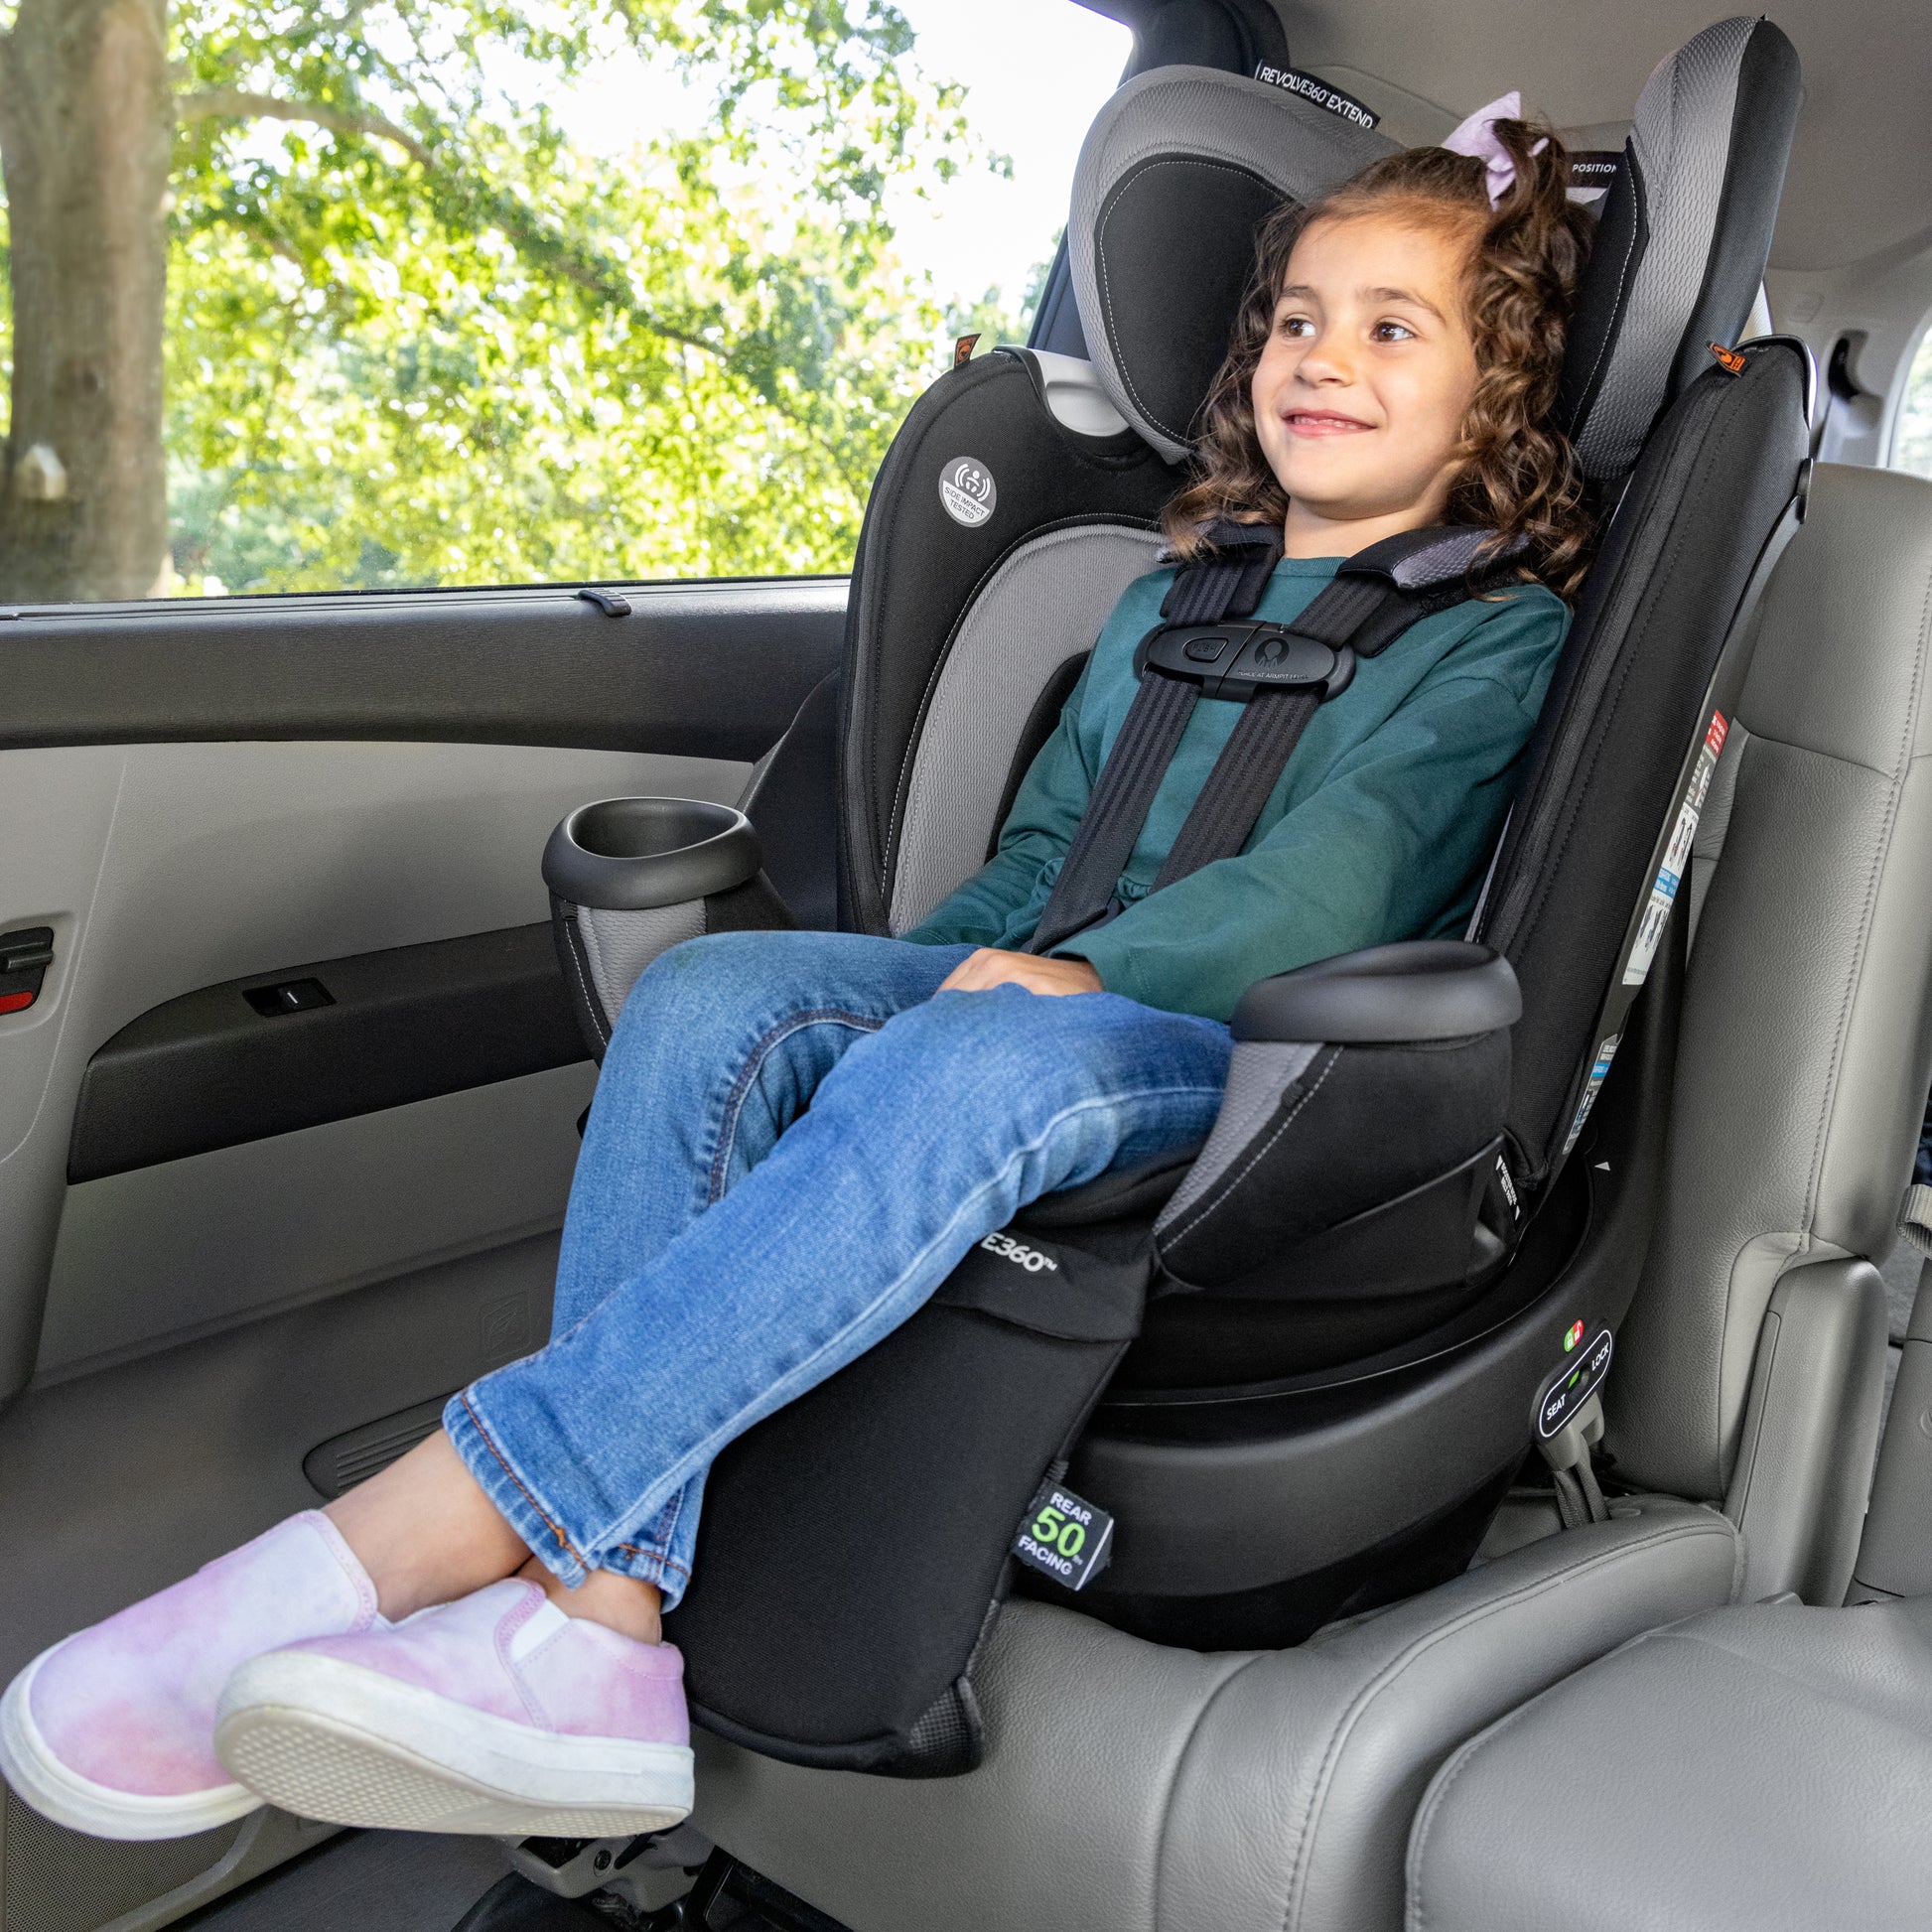 Car Seat Cushion - Car Seat Cushions For Driving With Larger Size To Add  More Comfort